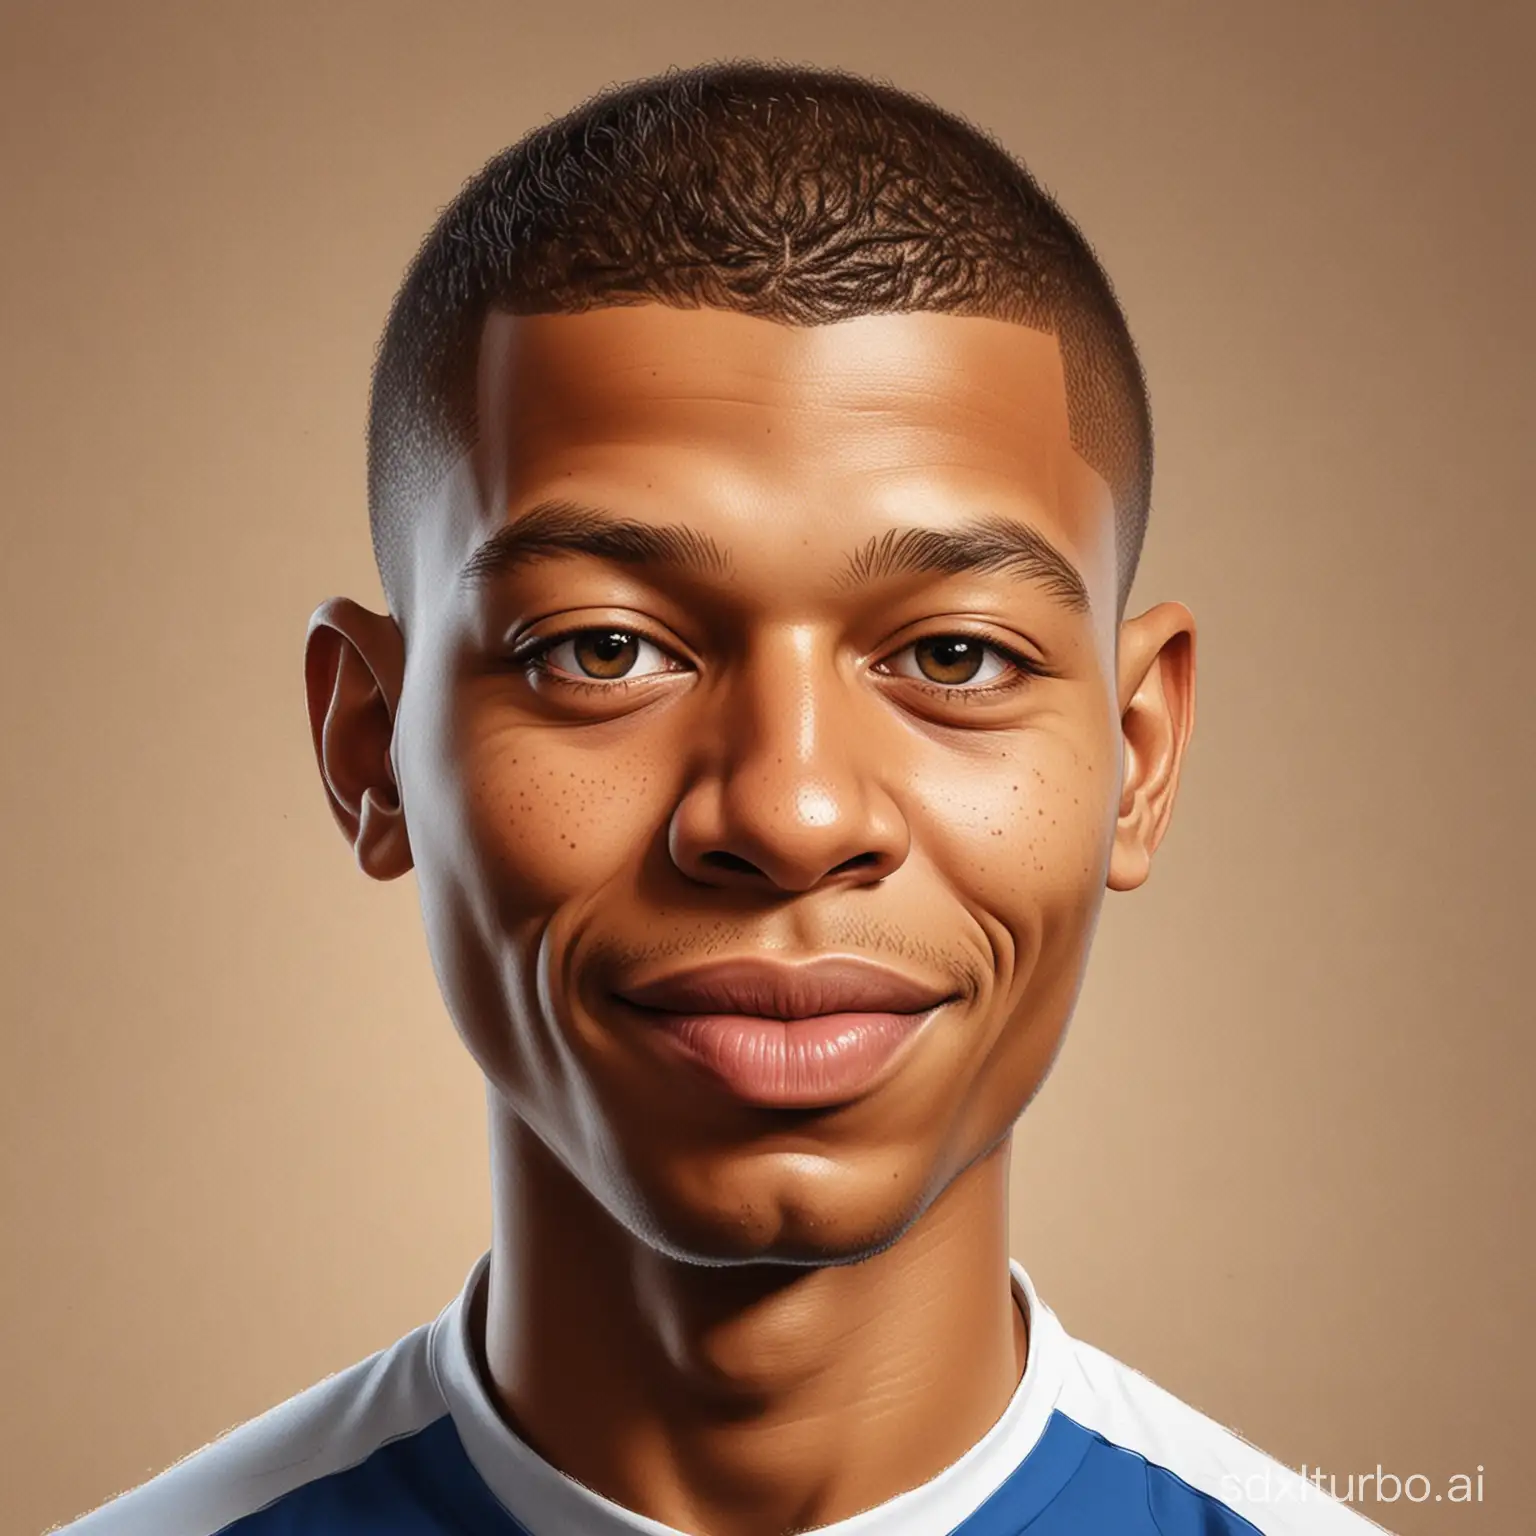 Caricature-of-French-Football-Star-Kylian-Mbapp